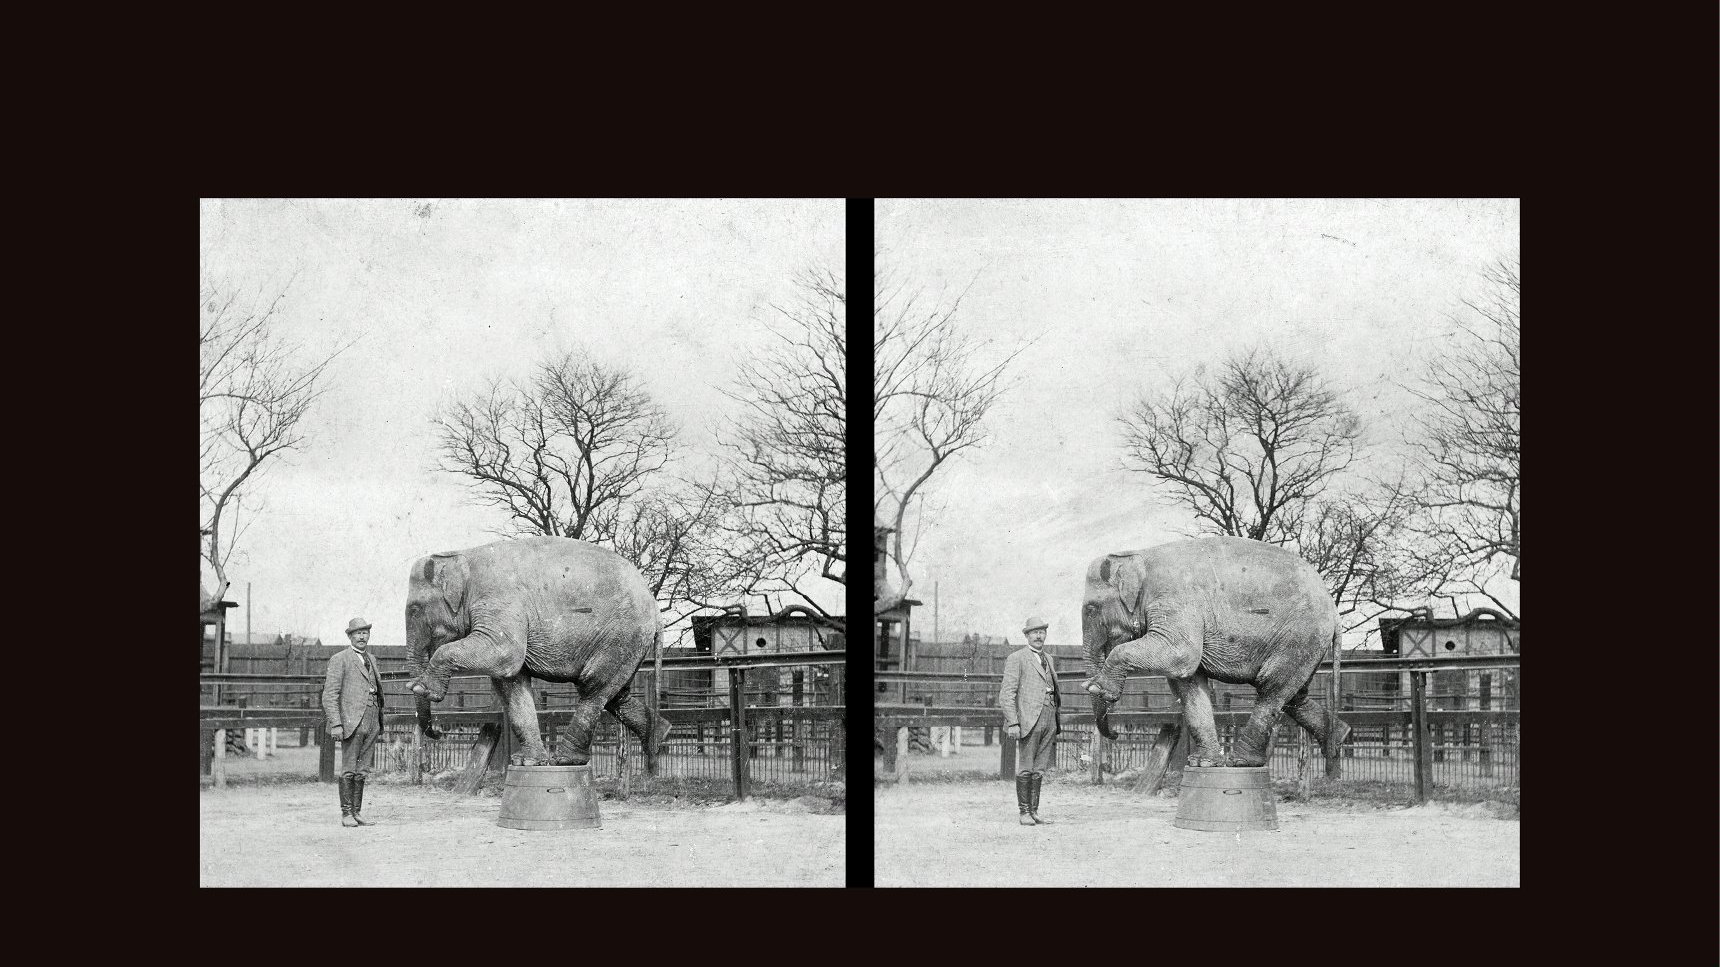 Black and white stereophotograph of the elephant standing on two legs on a small, round platform. A man standing next to the elephant. A wooden fence and a few trees as a background.